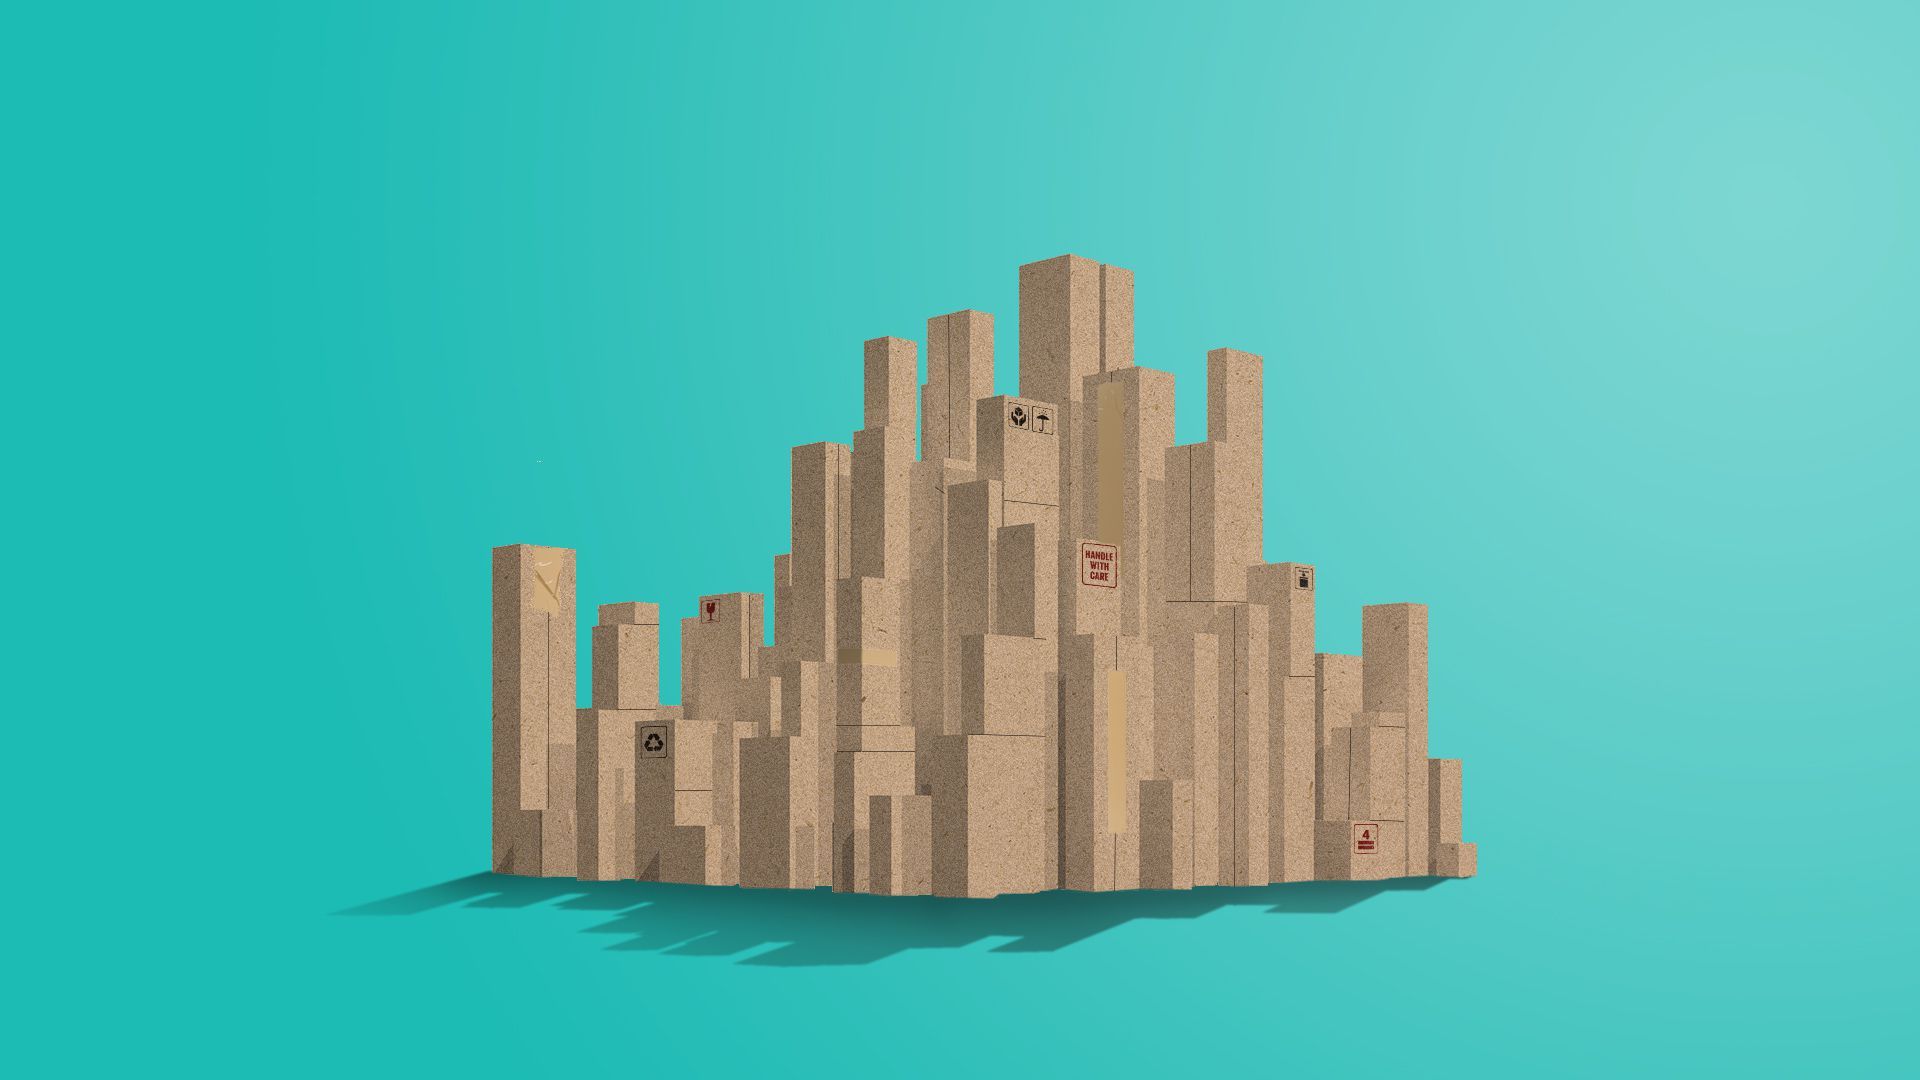 Illustration of a city made out of cardboard boxes